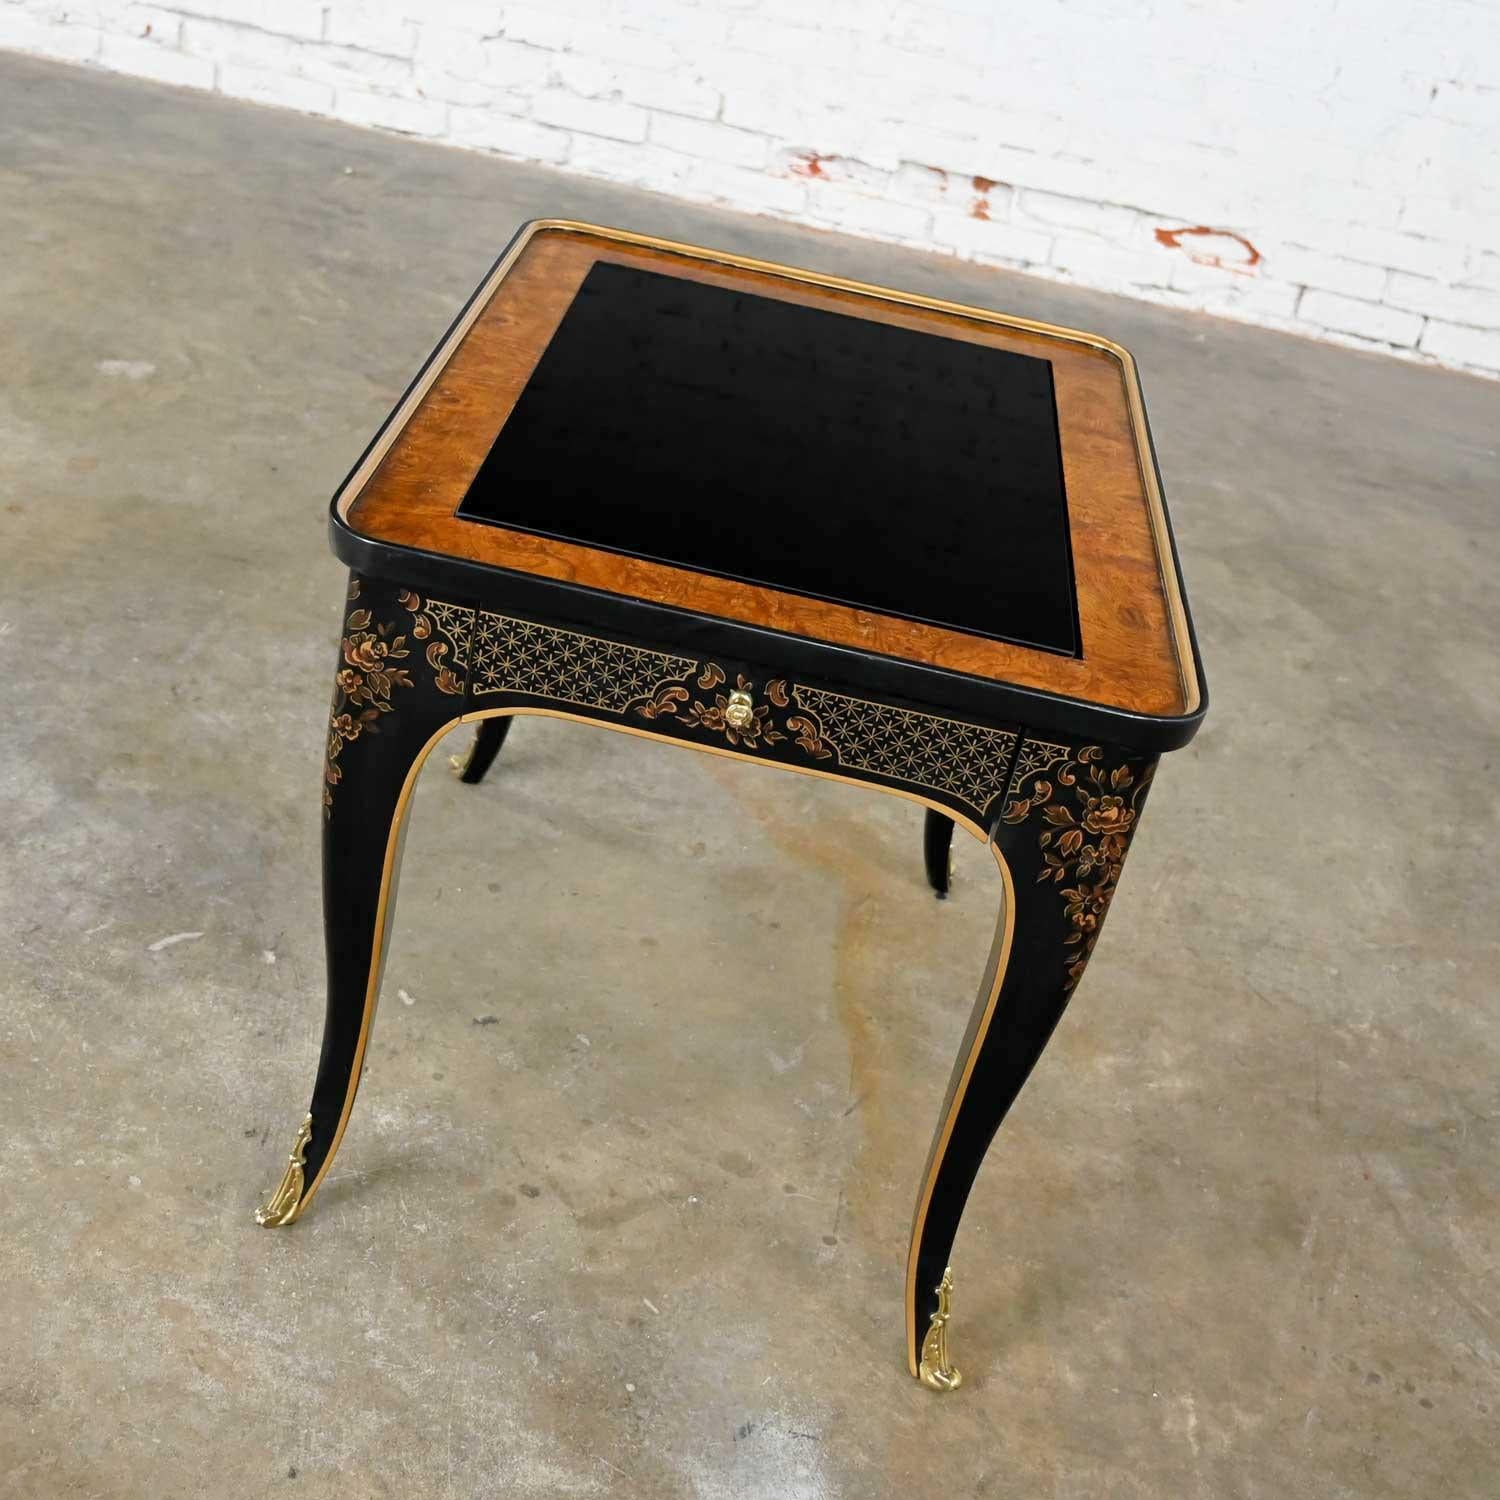 Outstanding Drexel Heritage ET Cetera collection chinoiserie black painted and burl end table or side table with gold detail and ormolu accents. Beautiful condition, keeping in mind that this is vintage and not new so will have signs of use and